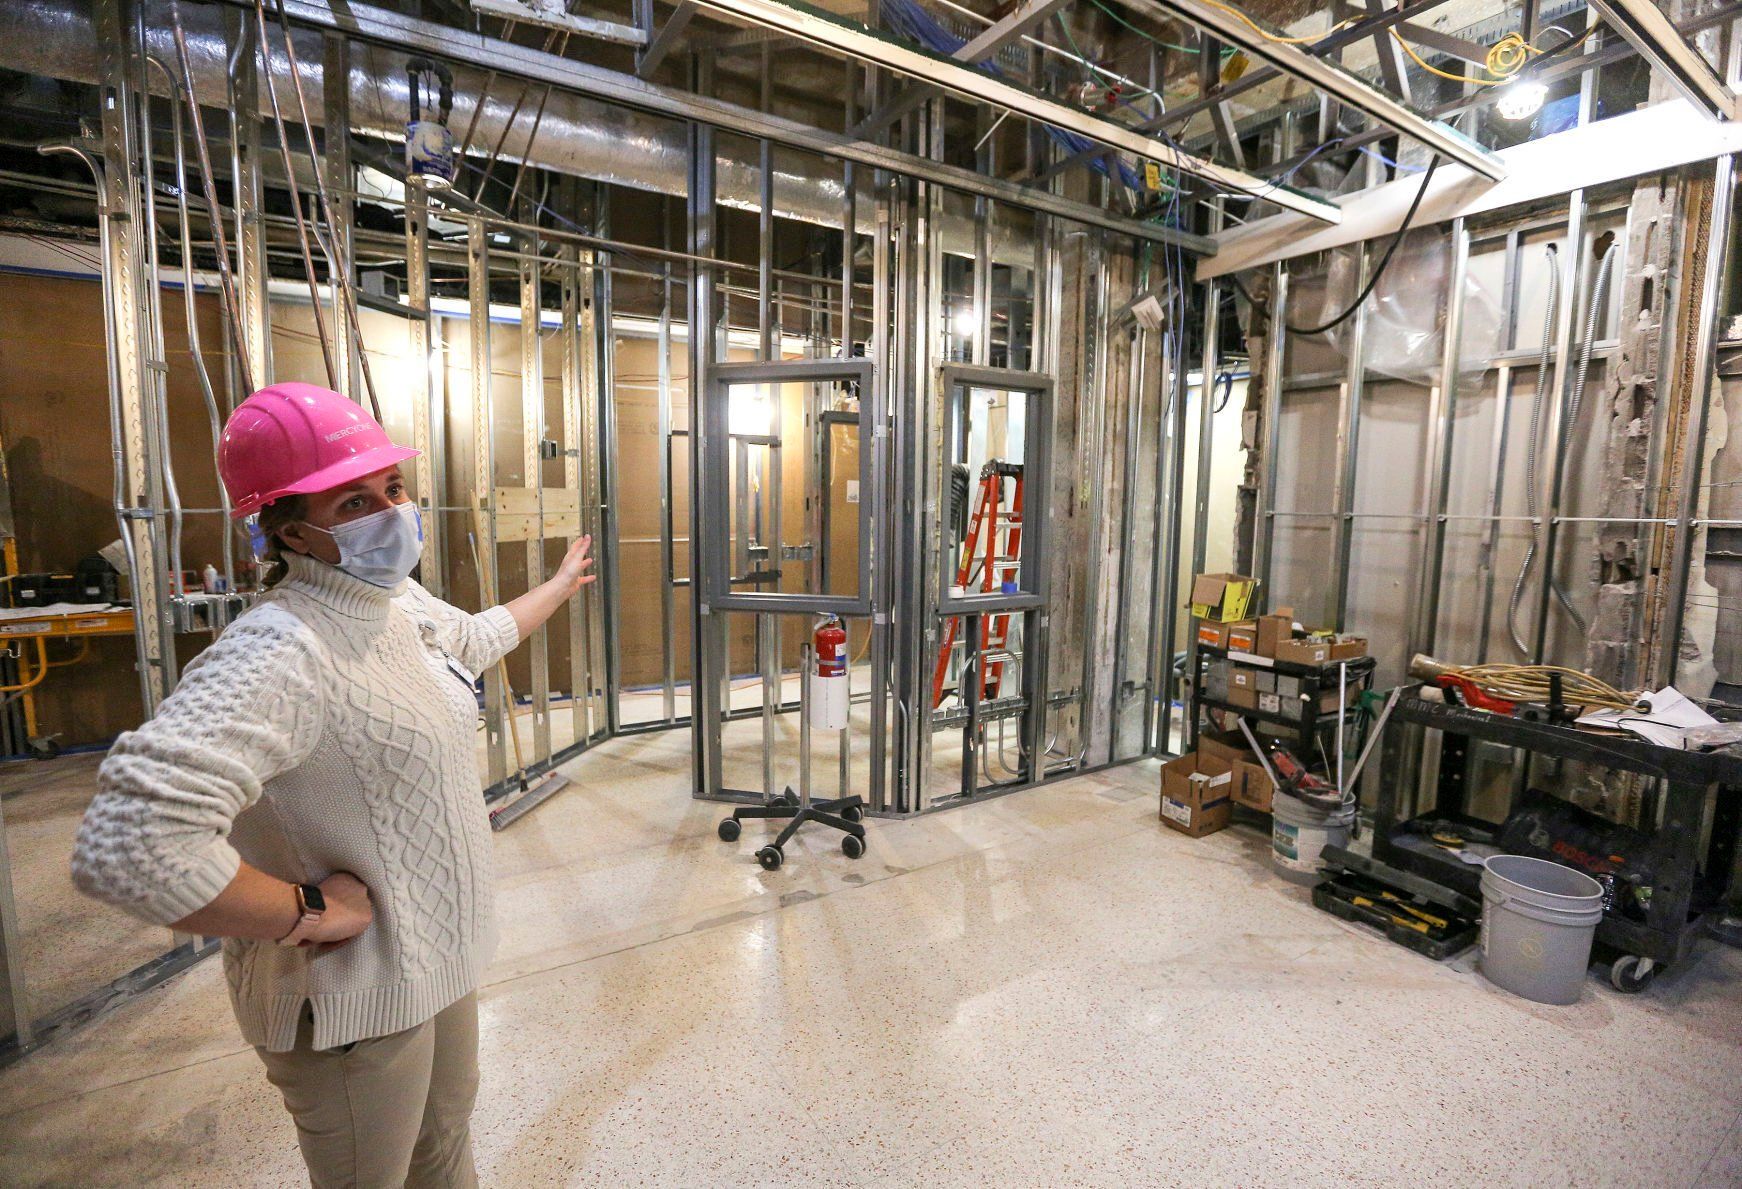 Environmental Health Coordinator and Project Management Assistant Mellissa Riechers shows a portion of MercyOne Dubuque Medical Center Imaging Services Unit that is part of a 3,500-square-foot expansion.    PHOTO CREDIT: Dave Kettering